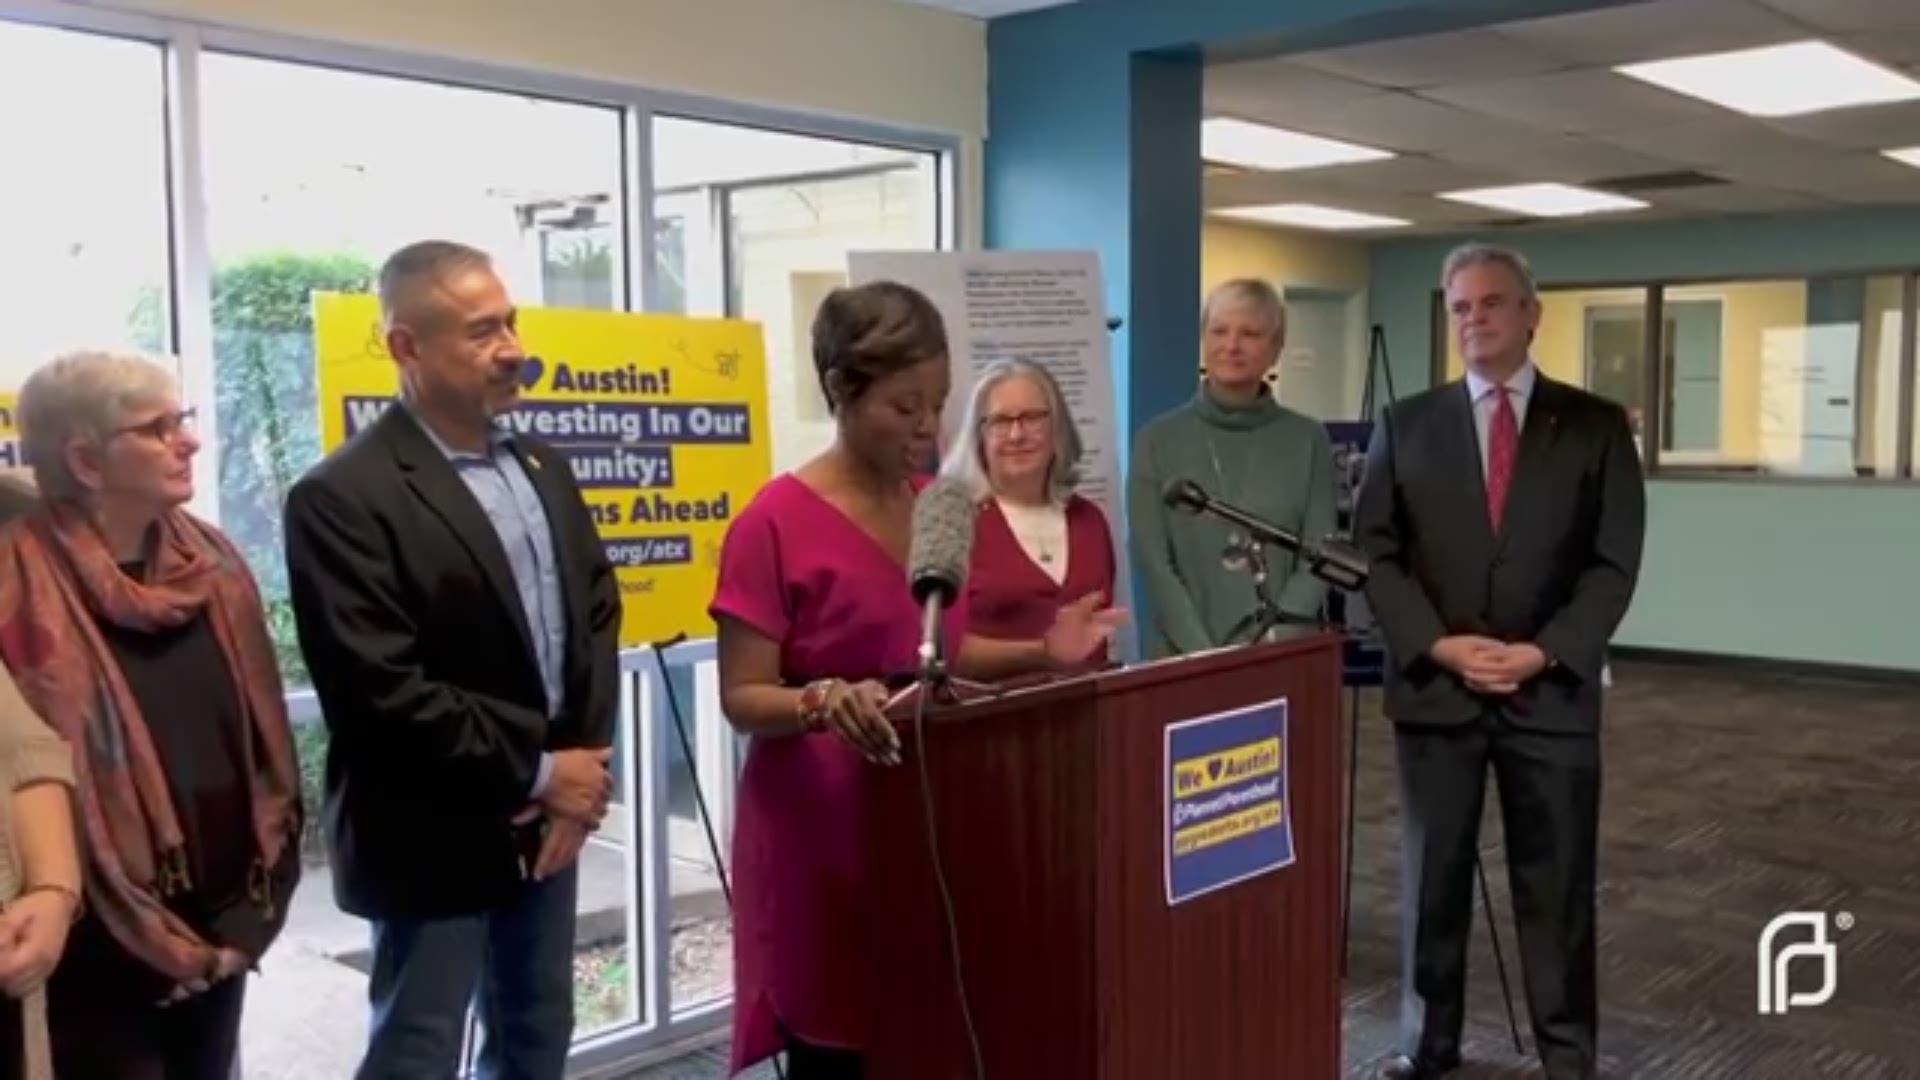 Mayor Steve Adler spoke at the announcement alongside other community and Planned Parenthood leaders.